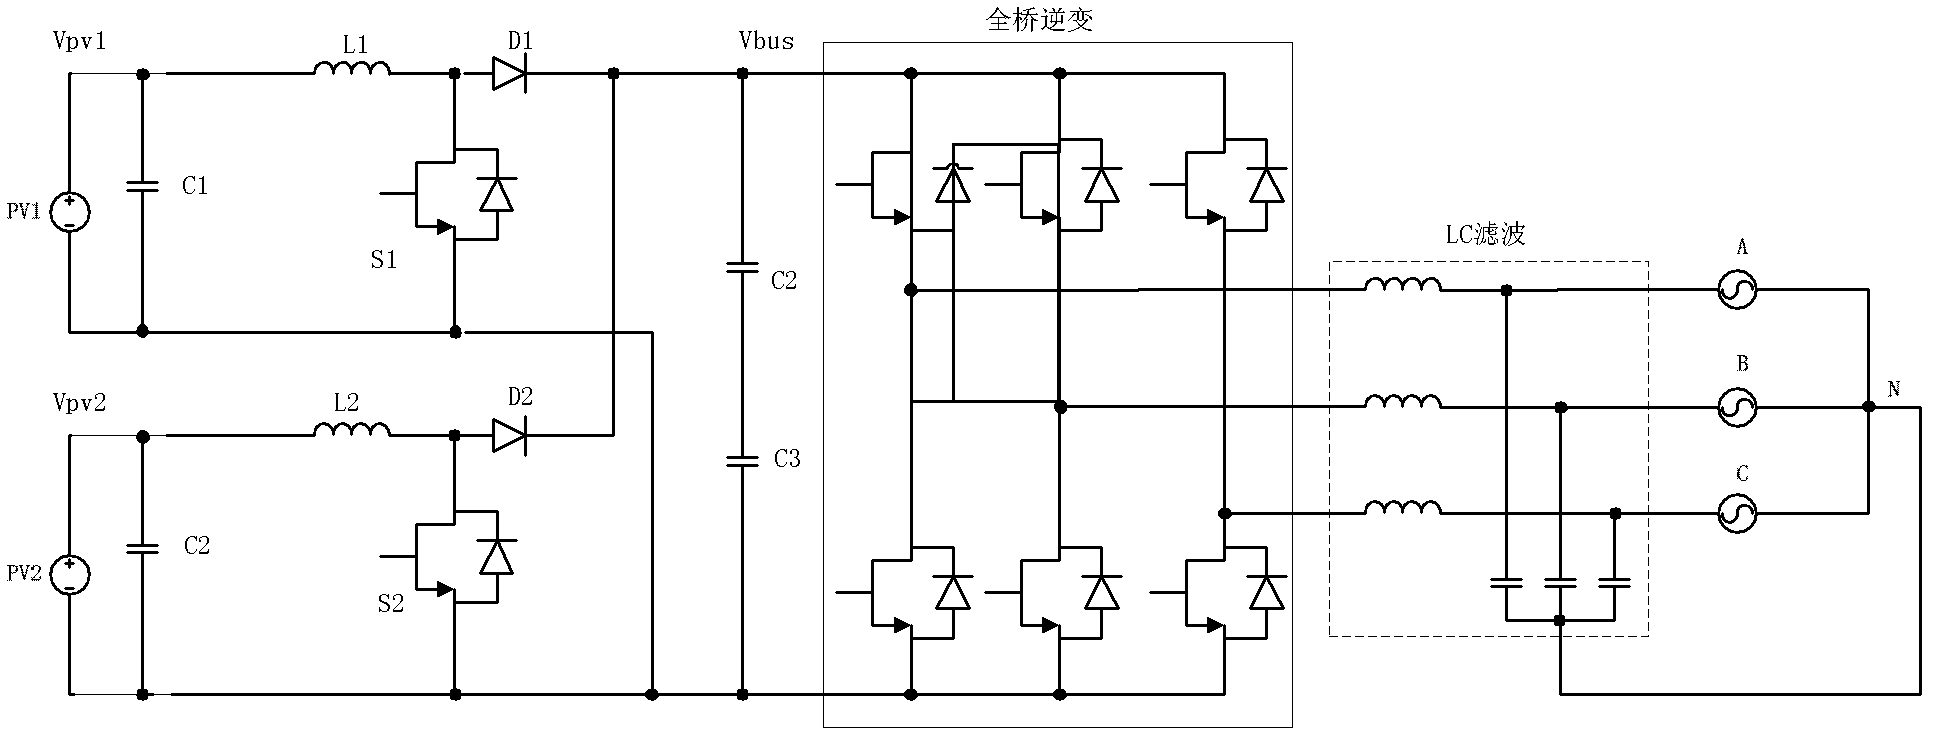 Maximum power point tracking control method for photovoltaic inverter